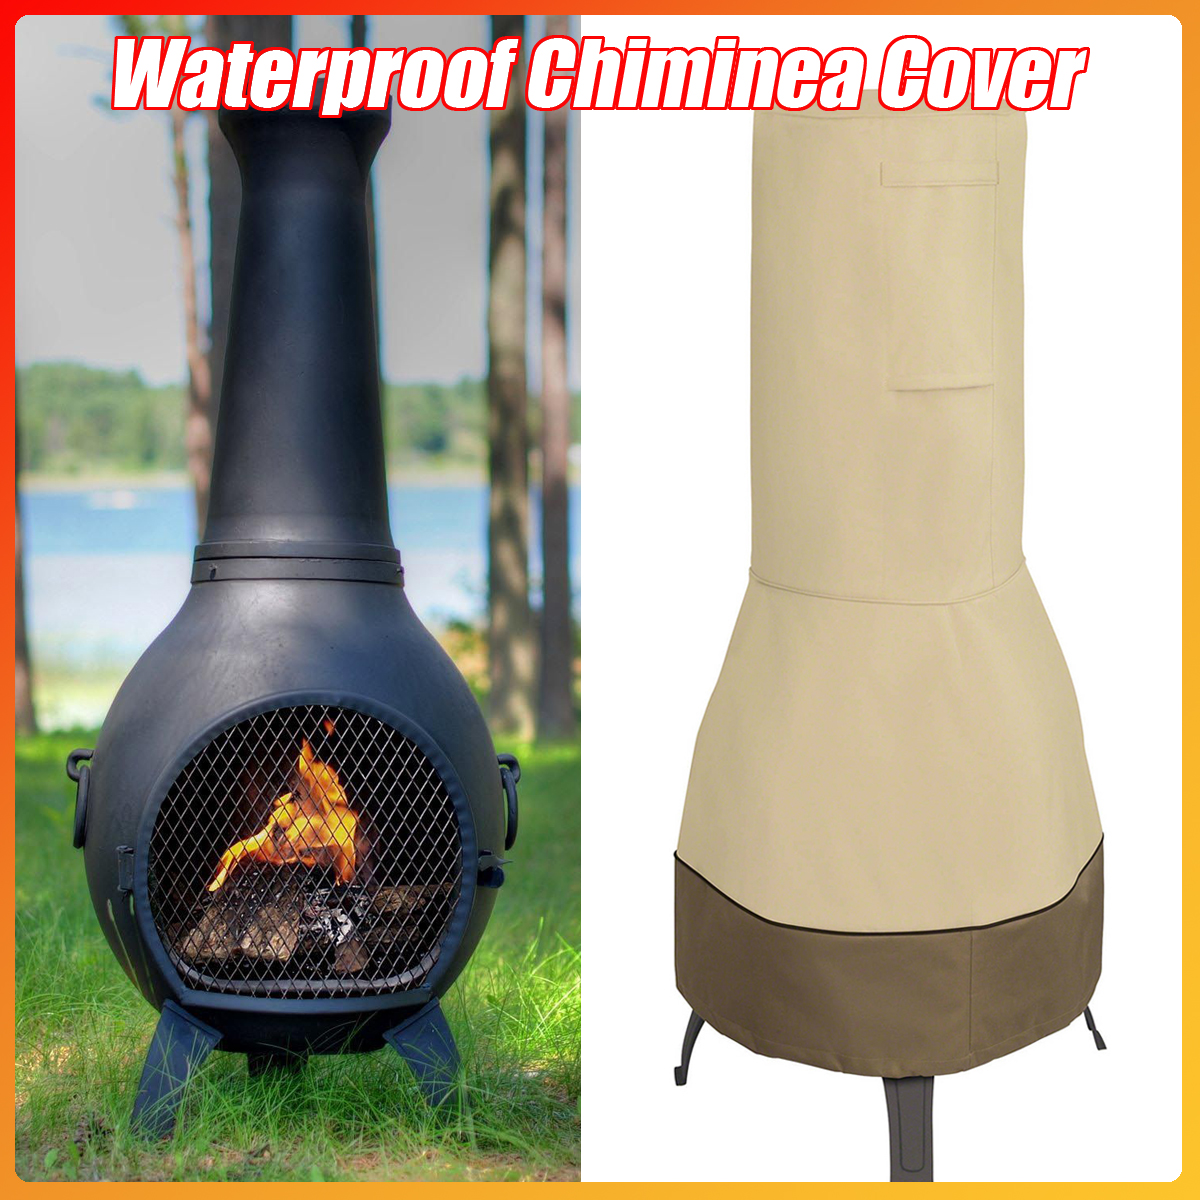 Chiminea Cover Outdoor Patio Waterproof Dustproof Sunscreen Protective Chimney Fire Pit Heater Cover Stove Cover for Garden Backyard